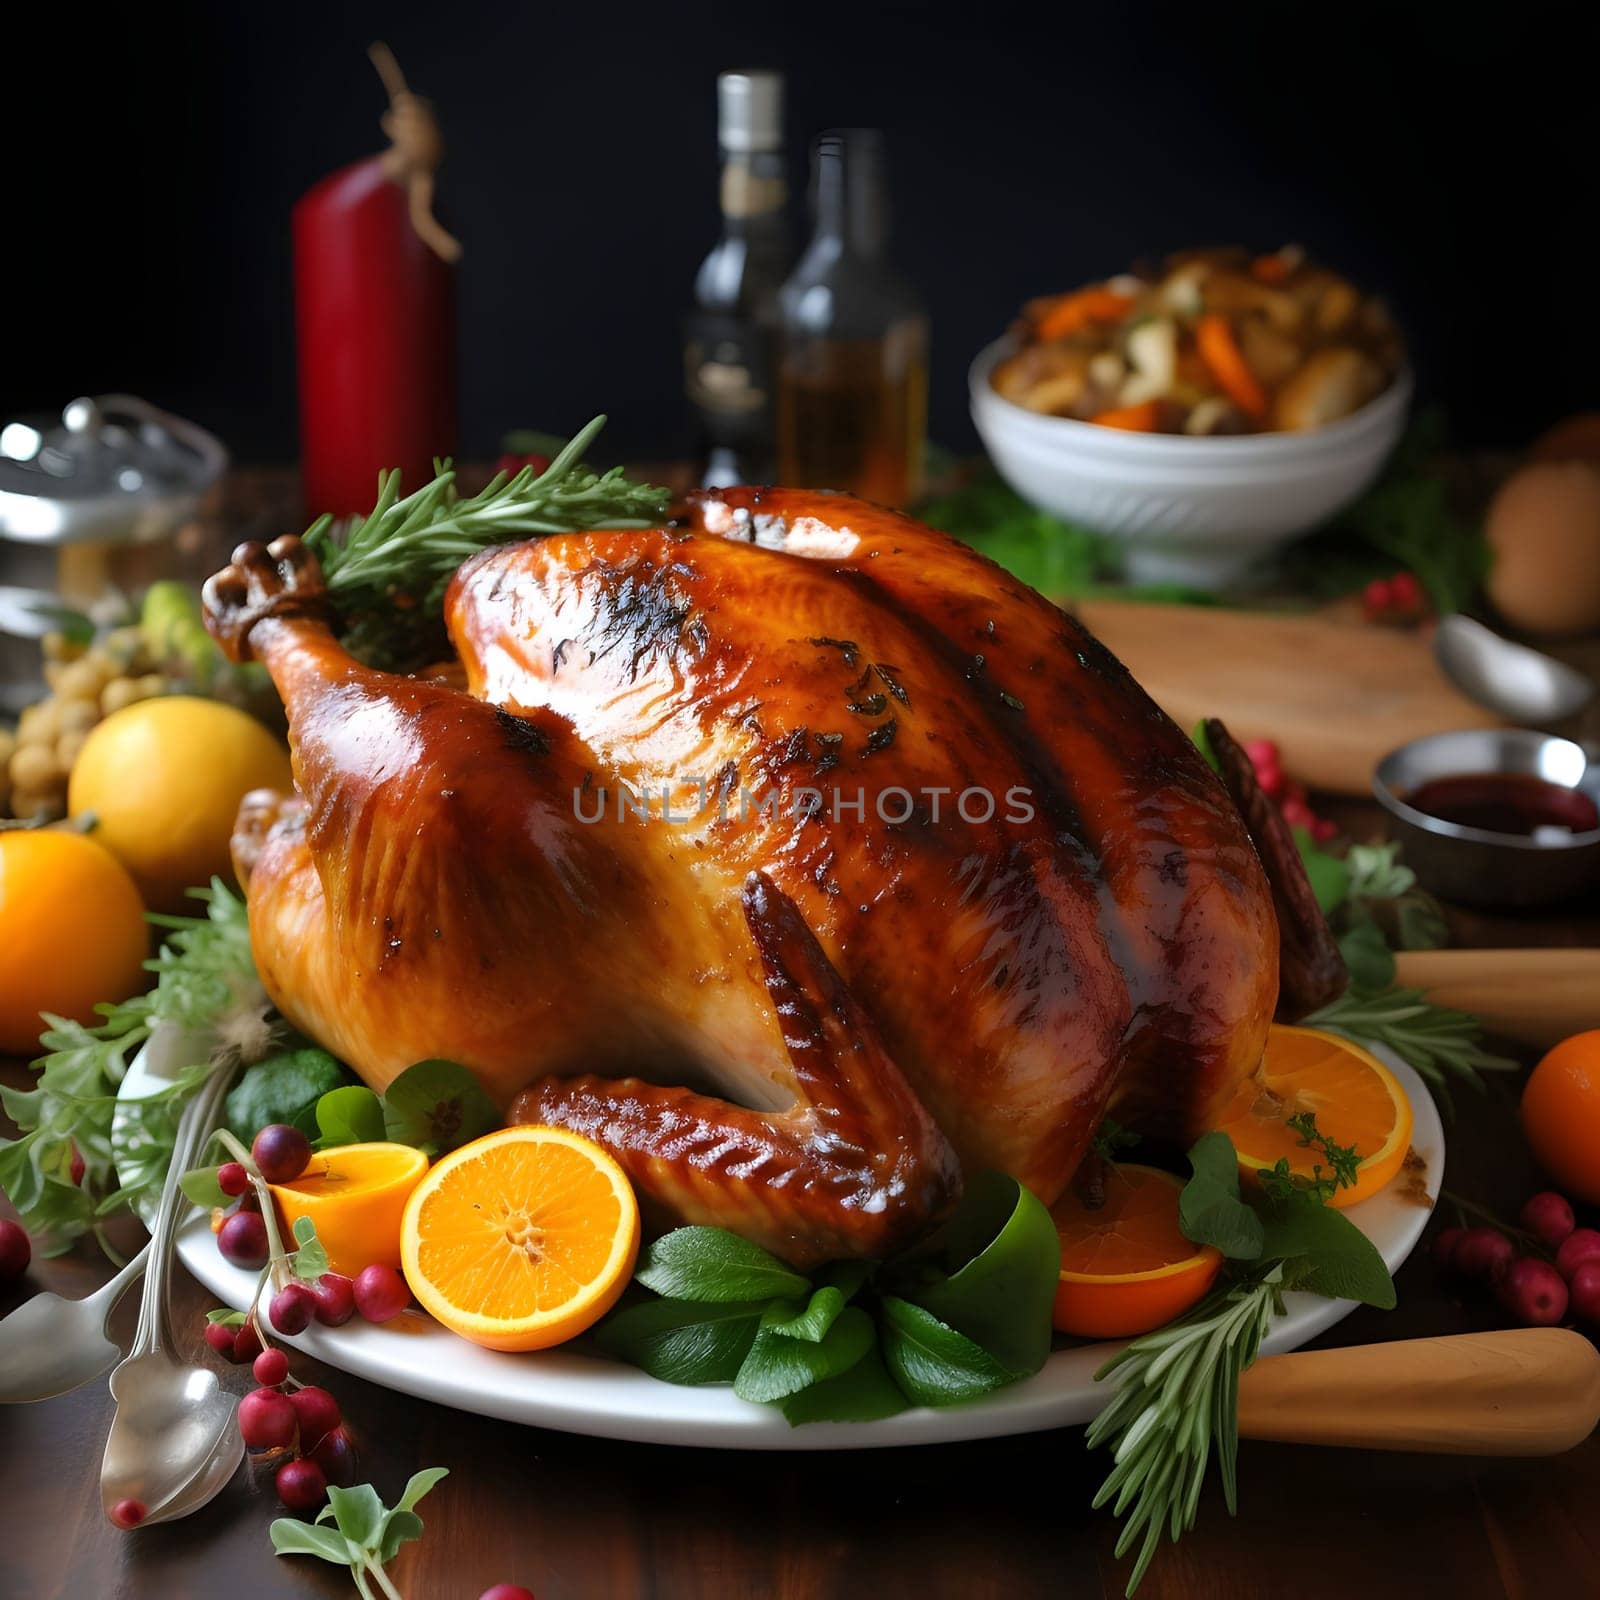 Roast turkey on a plate decorated with lemons, oranges to a circle of bottle spices. Turkey as the main dish of thanksgiving for the harvest. An atmosphere of joy and celebration.